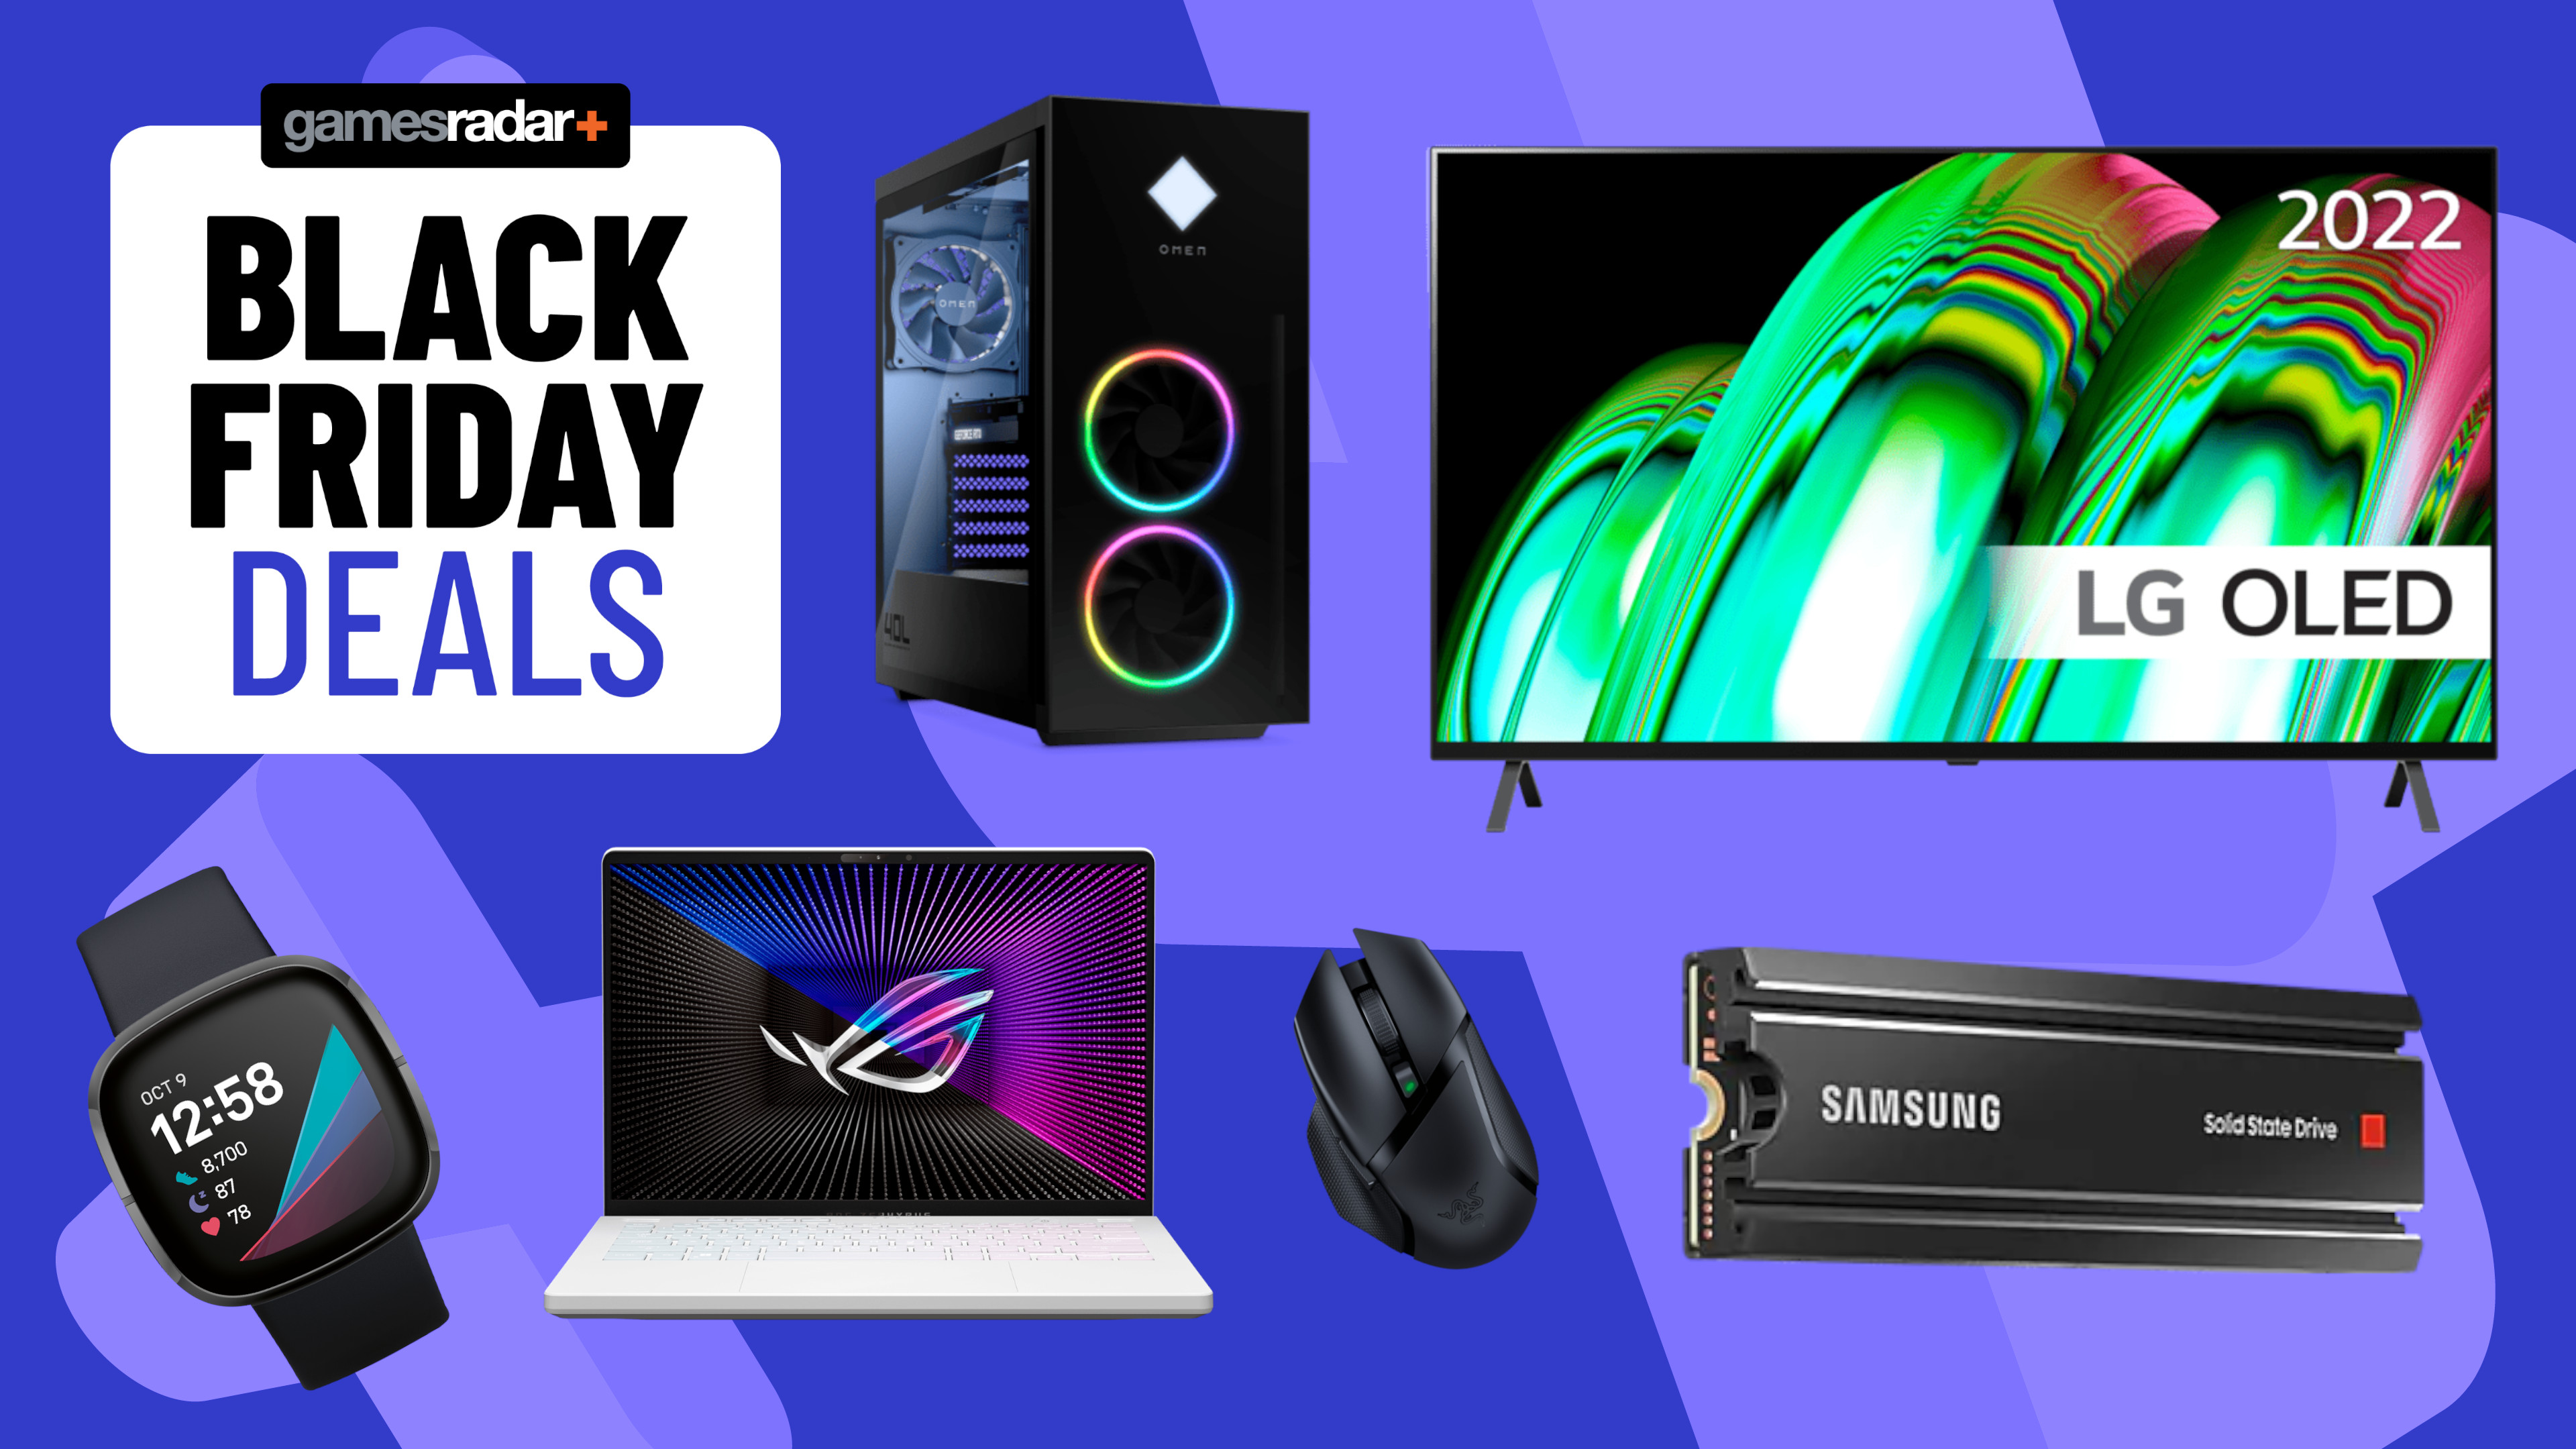 The HP Black Friday Sale Starts Now: Save on OMEN and Victus Gaming PCs &  Laptops